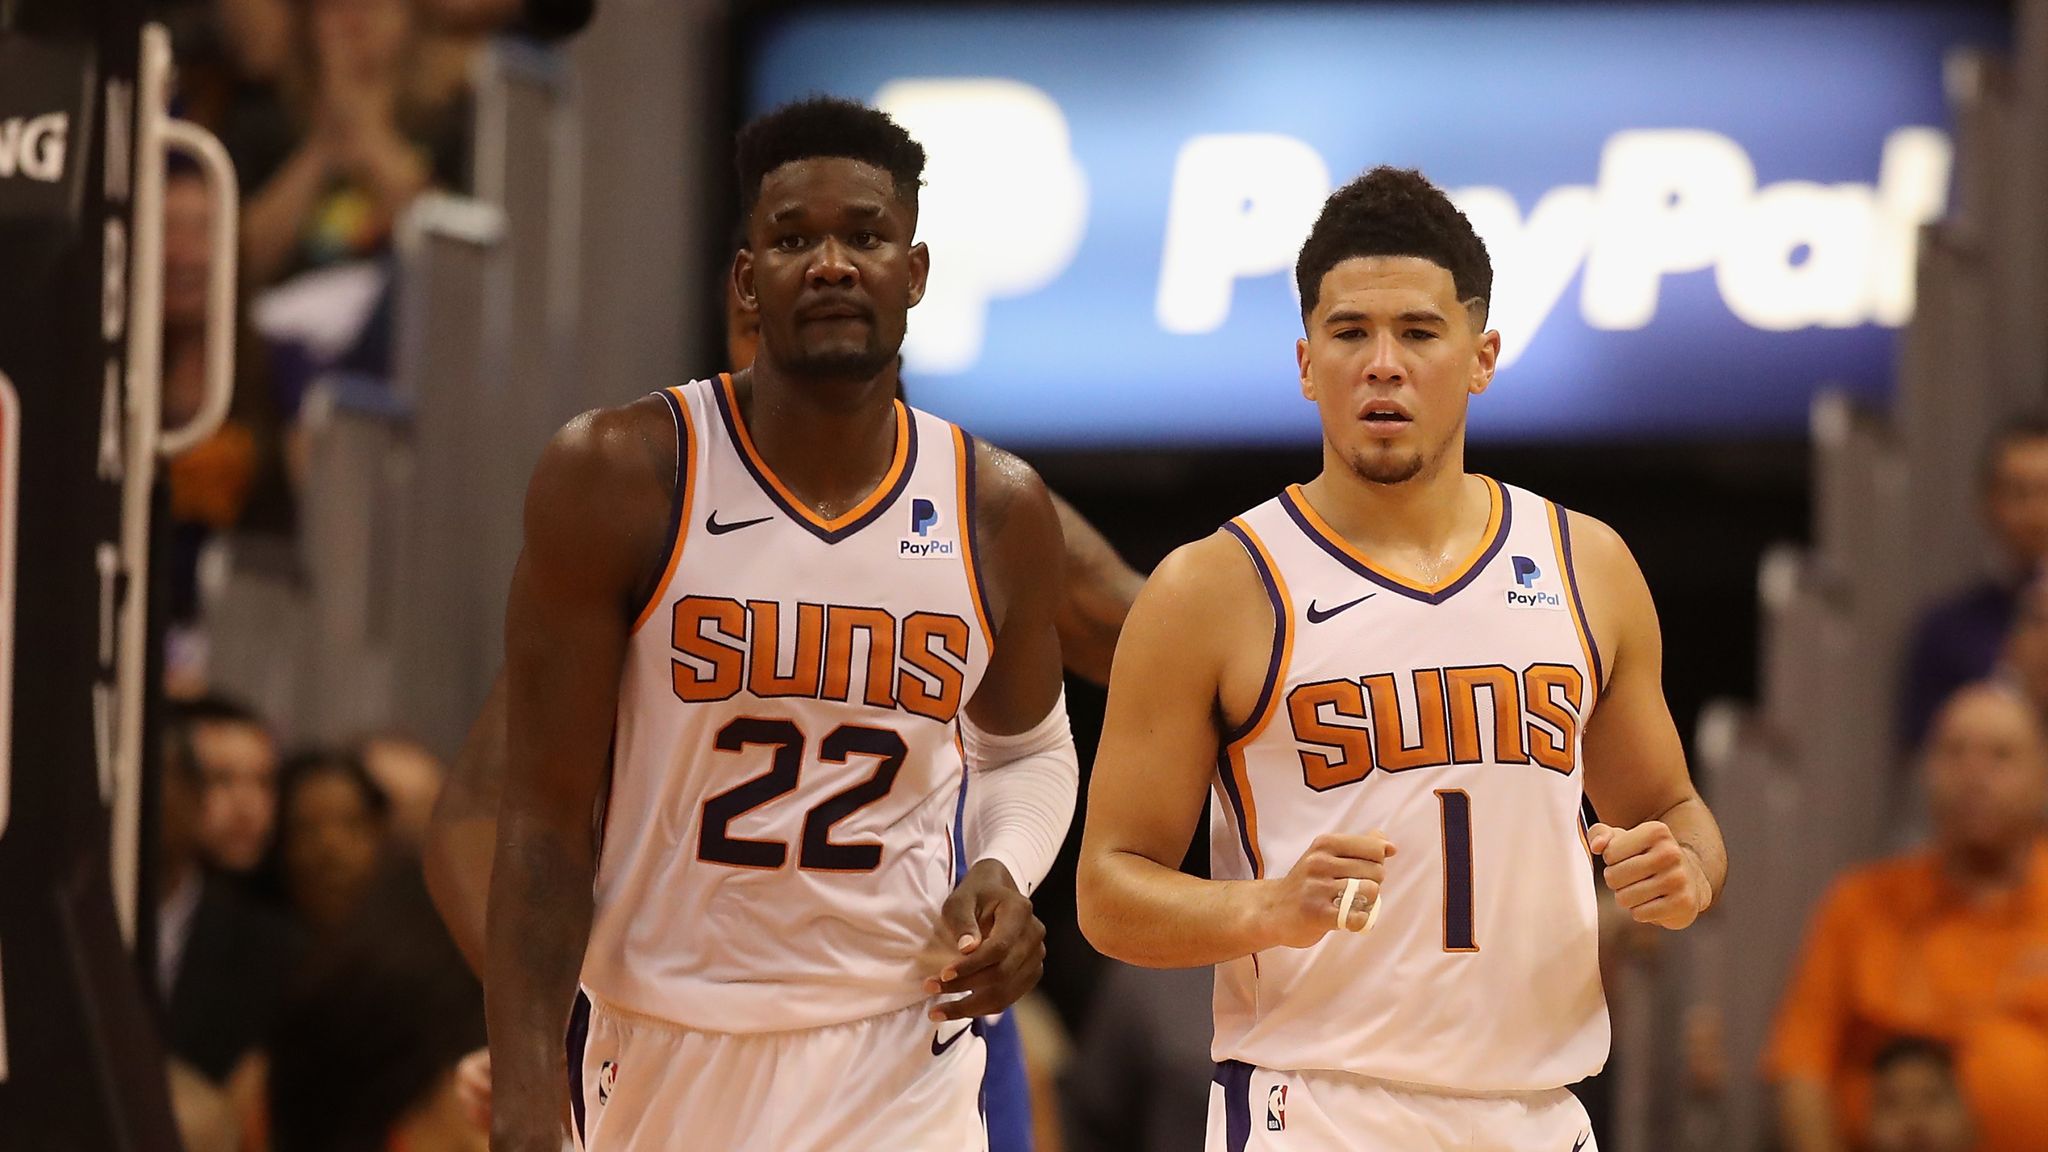 Phoenix Suns' Devin Booker Shares Adorable Moment with Teammate Deandre  Ayton's Son